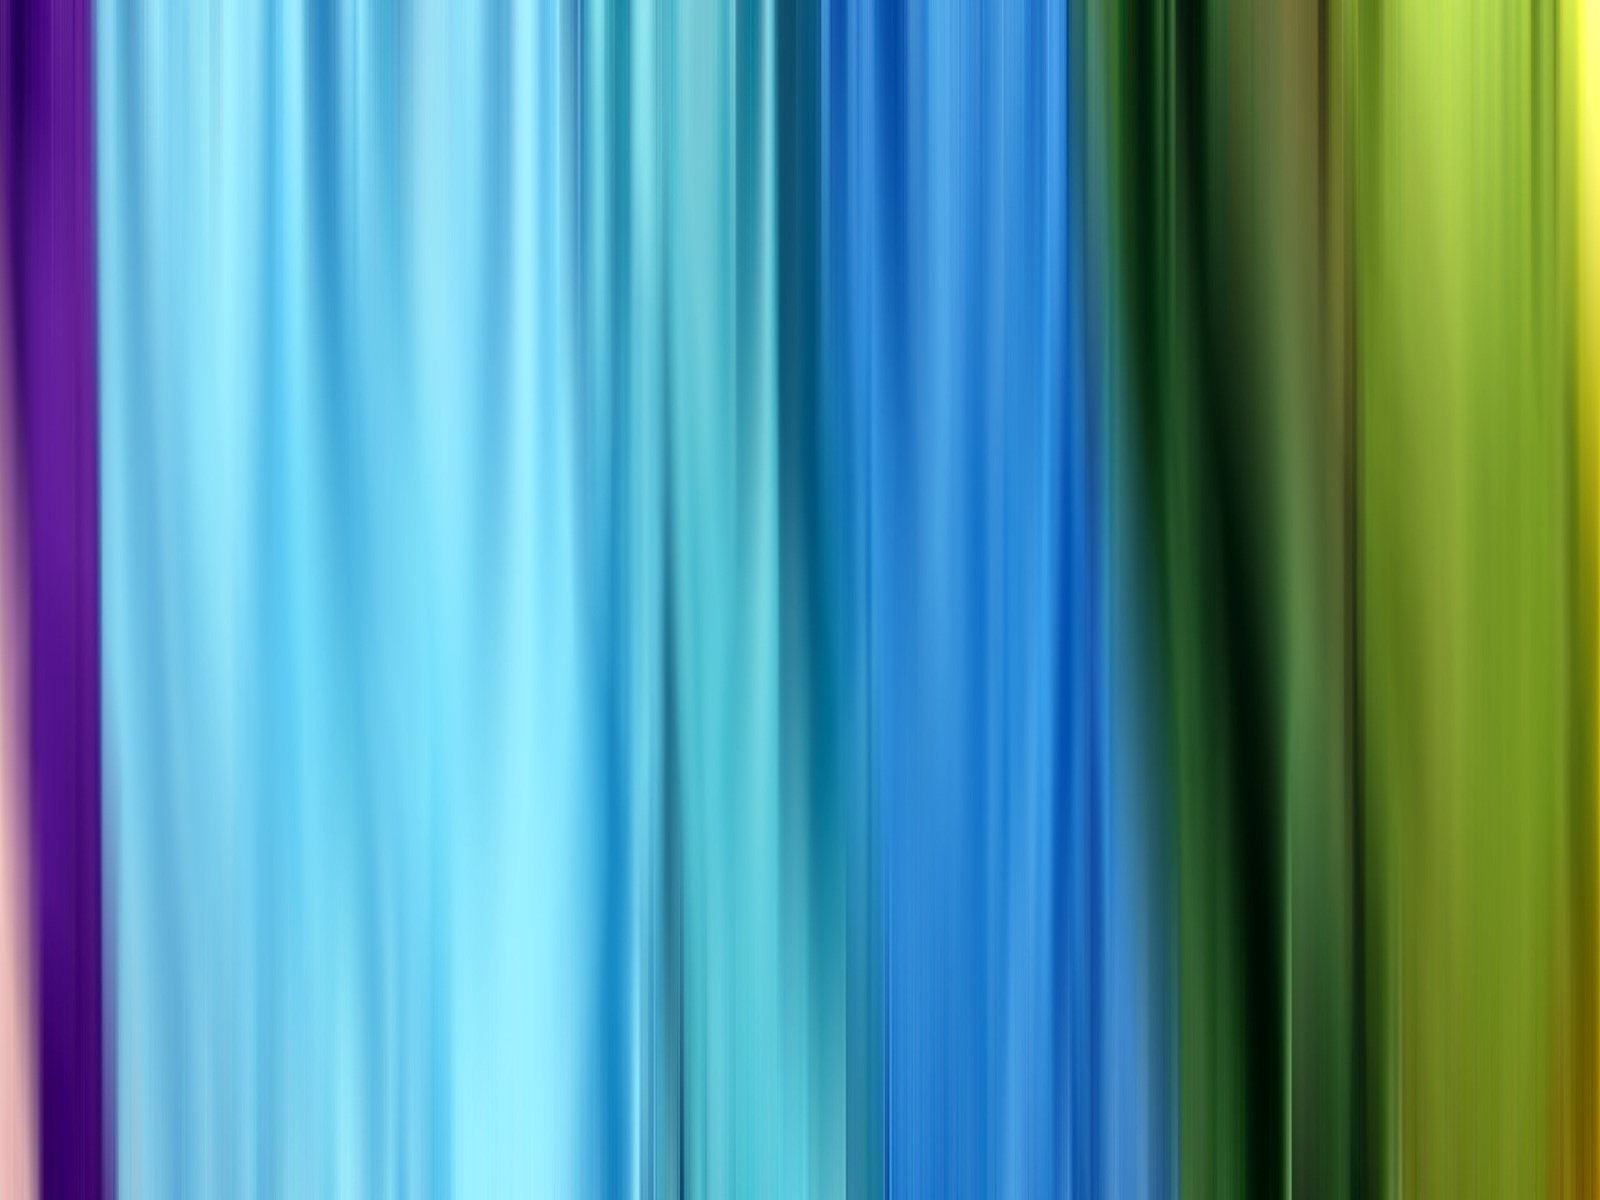 an abstract rainbow colored image with blurry lines